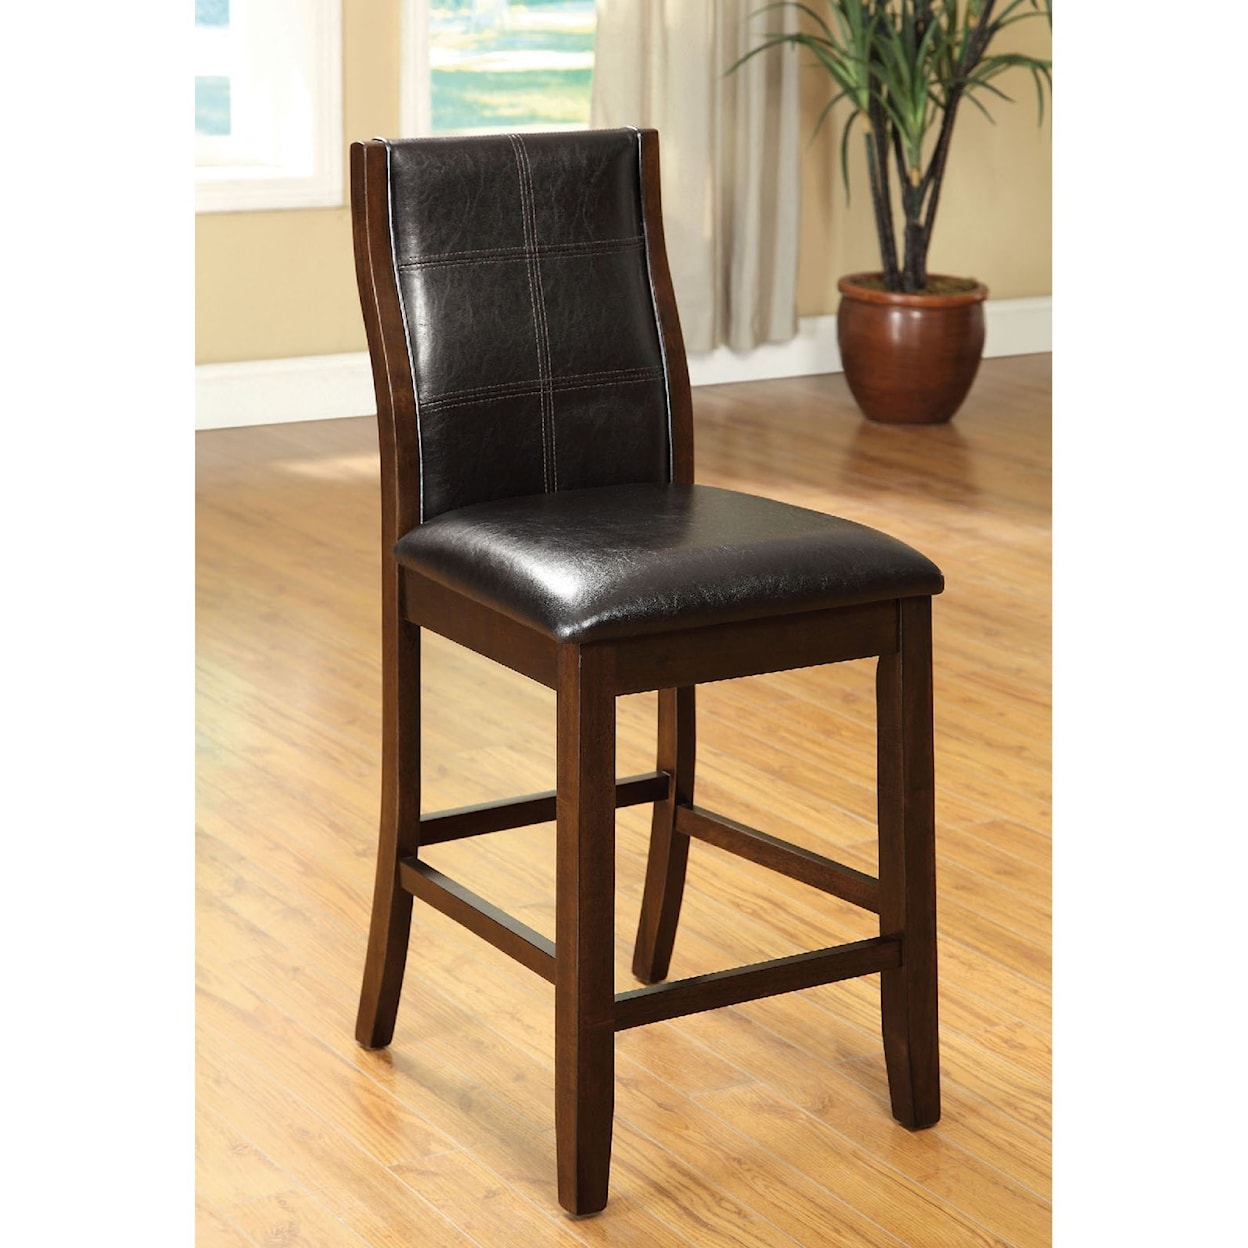 Furniture of America Townsend III Set of Counter Height Stools